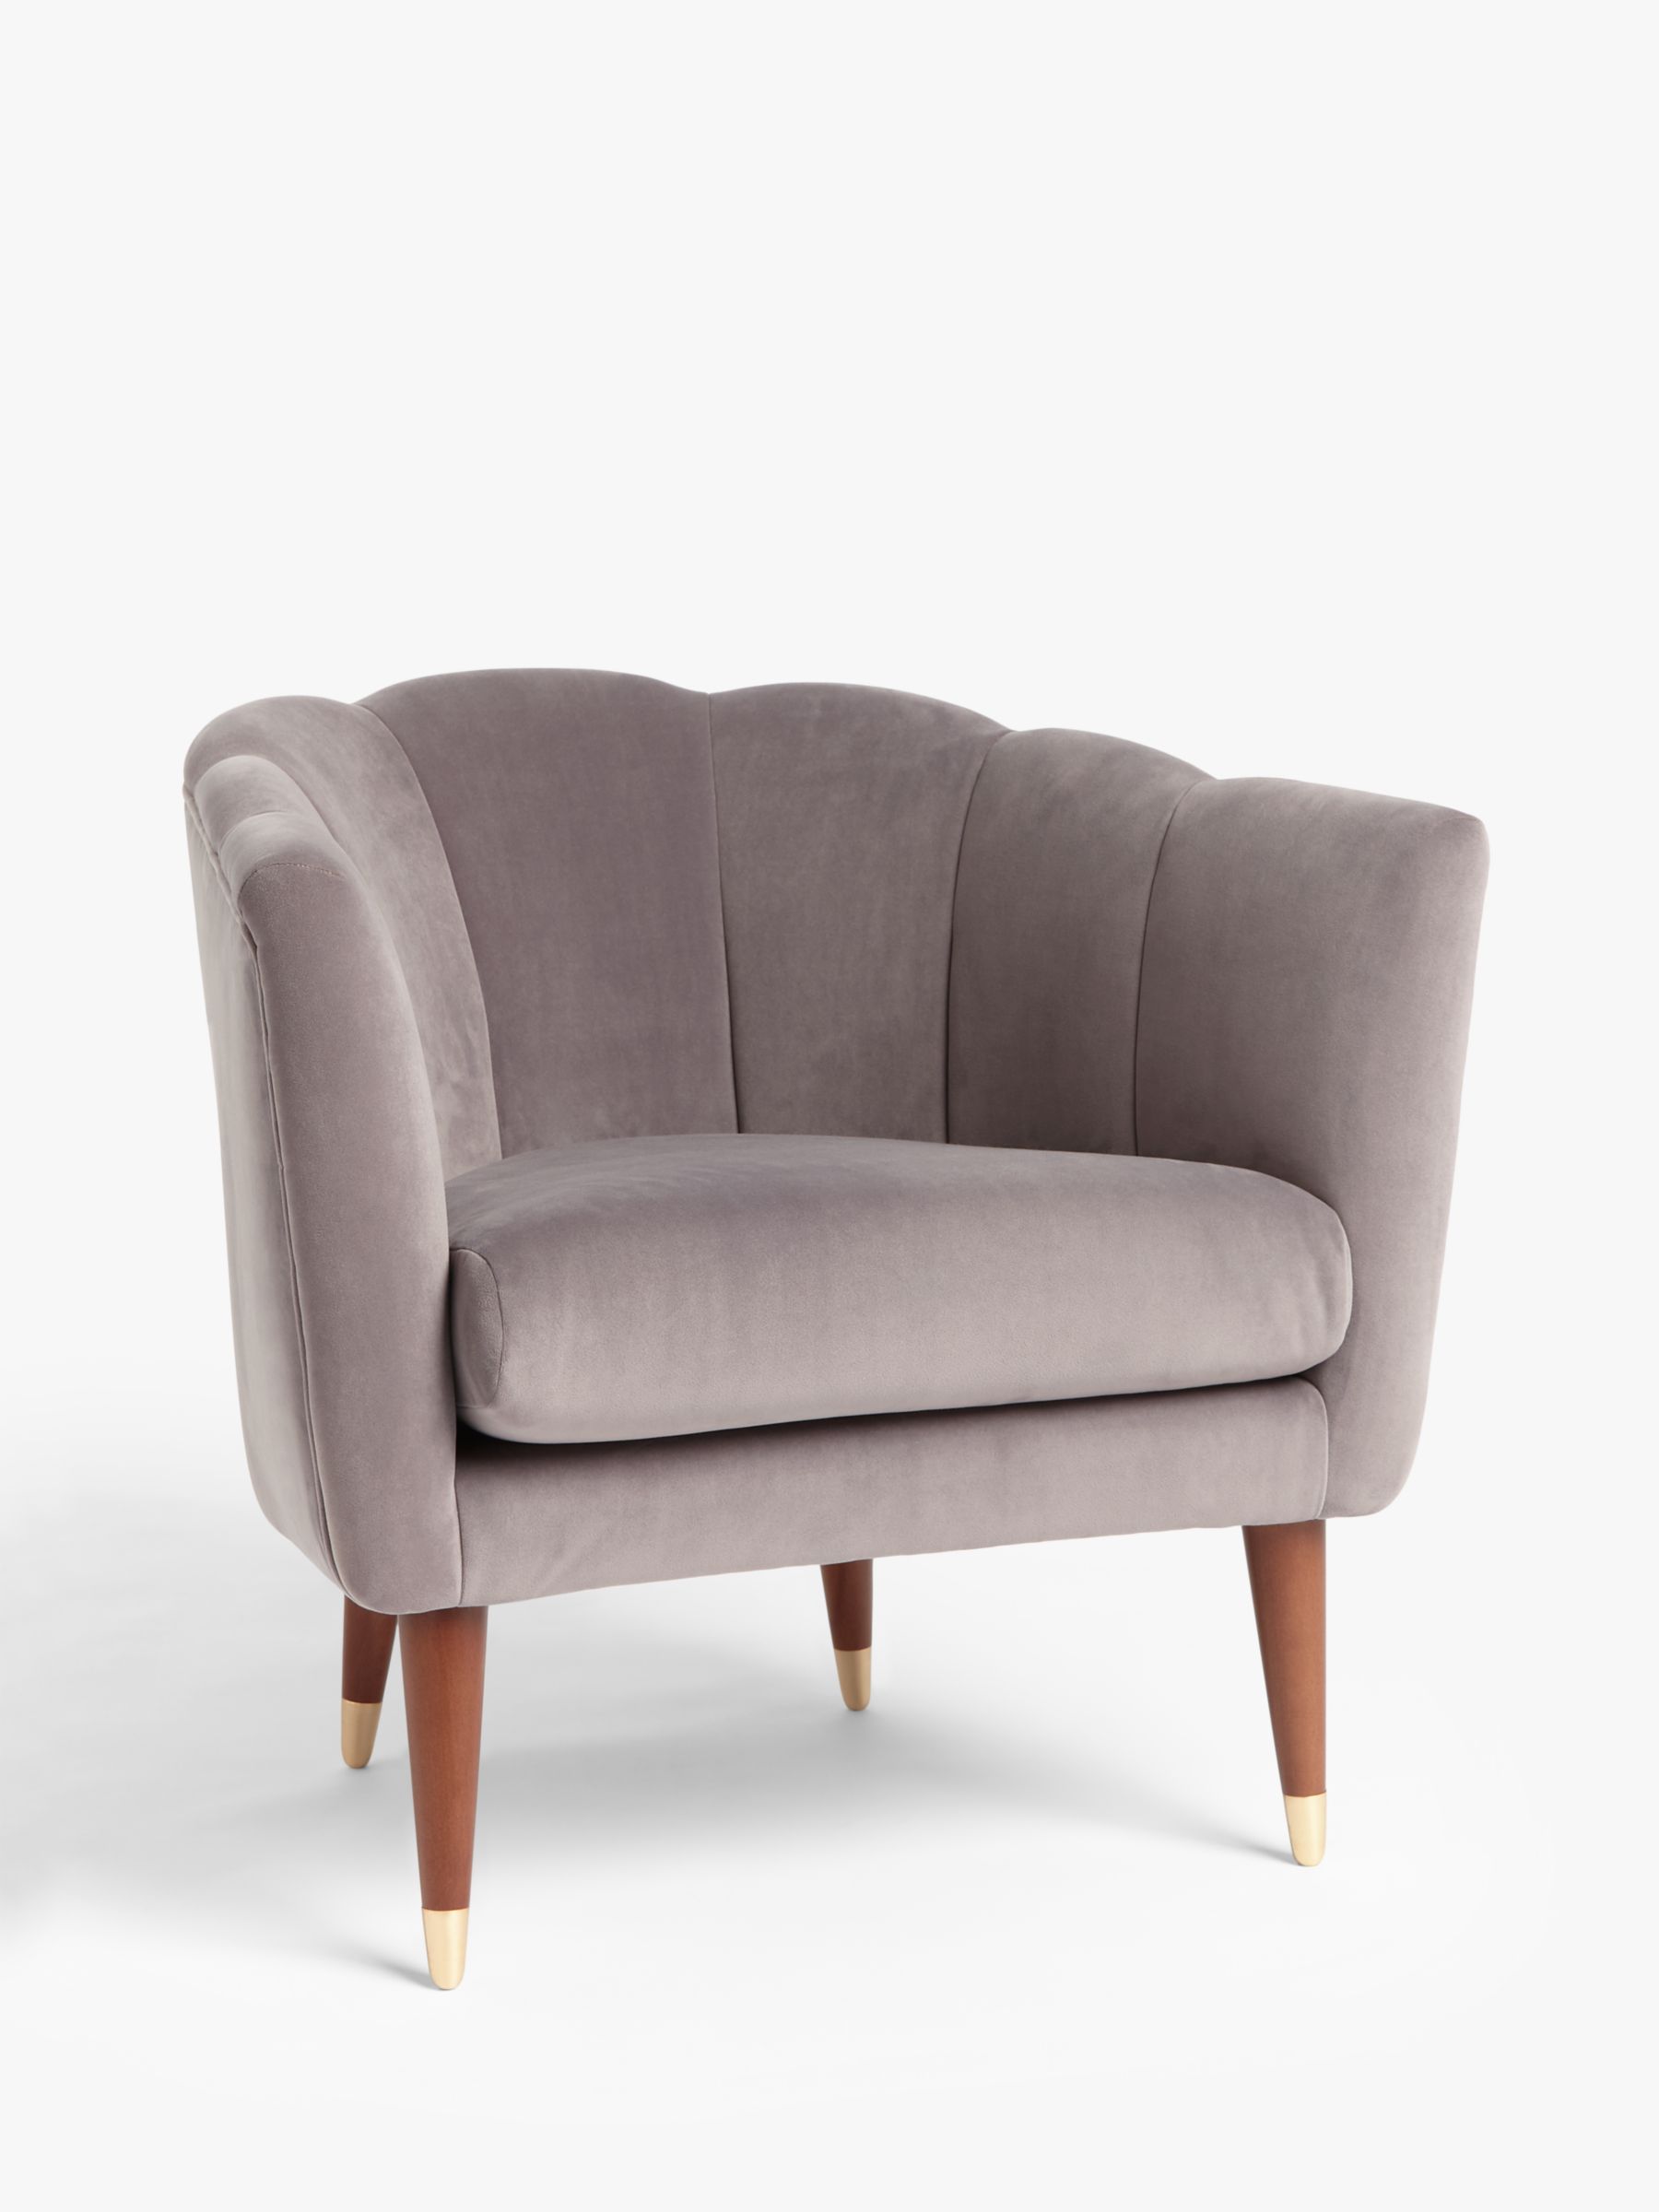 Photo of John lewis + swoon enville occasional armchair